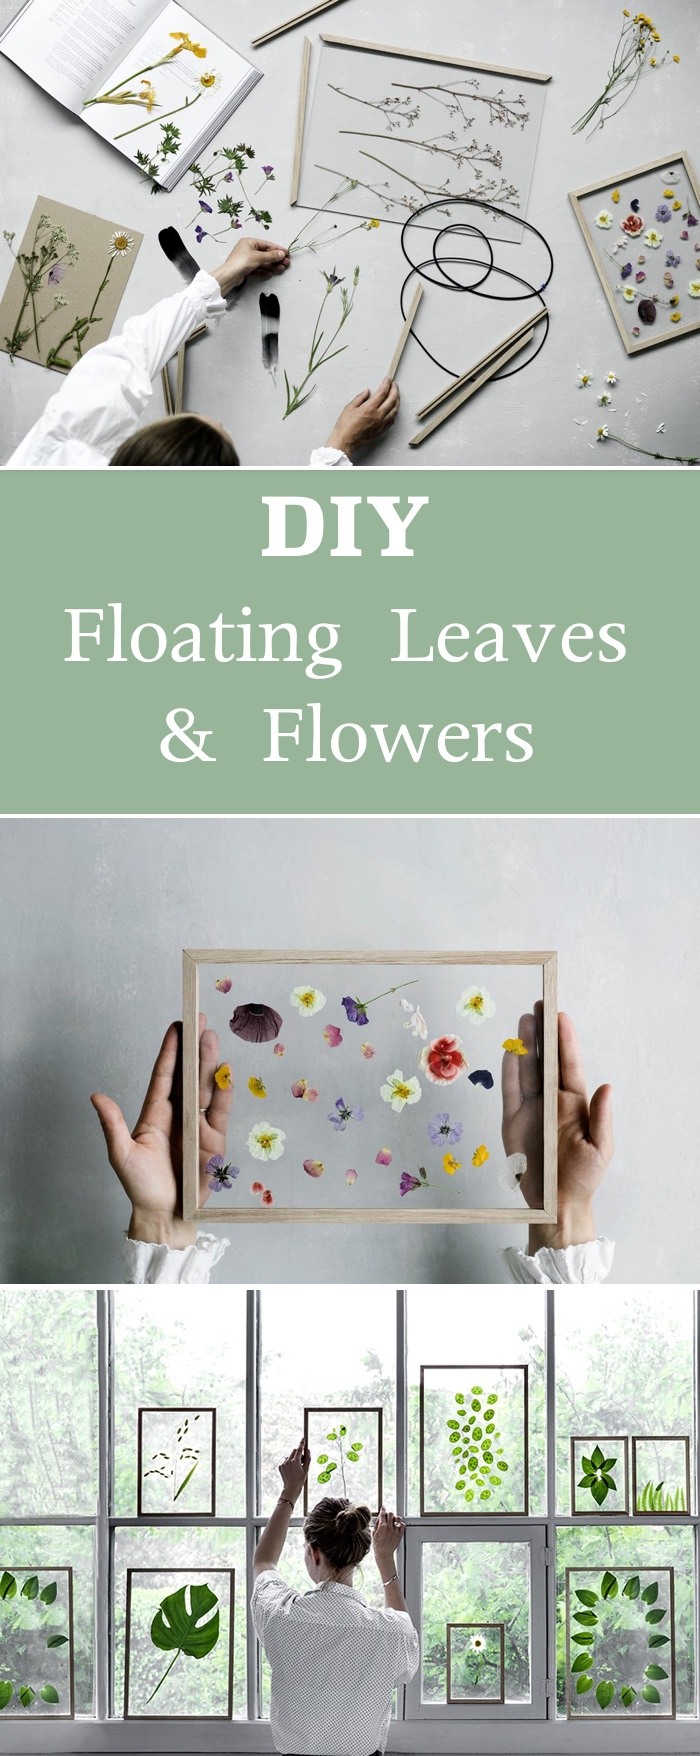 DIY Floating Leaves and Flowers